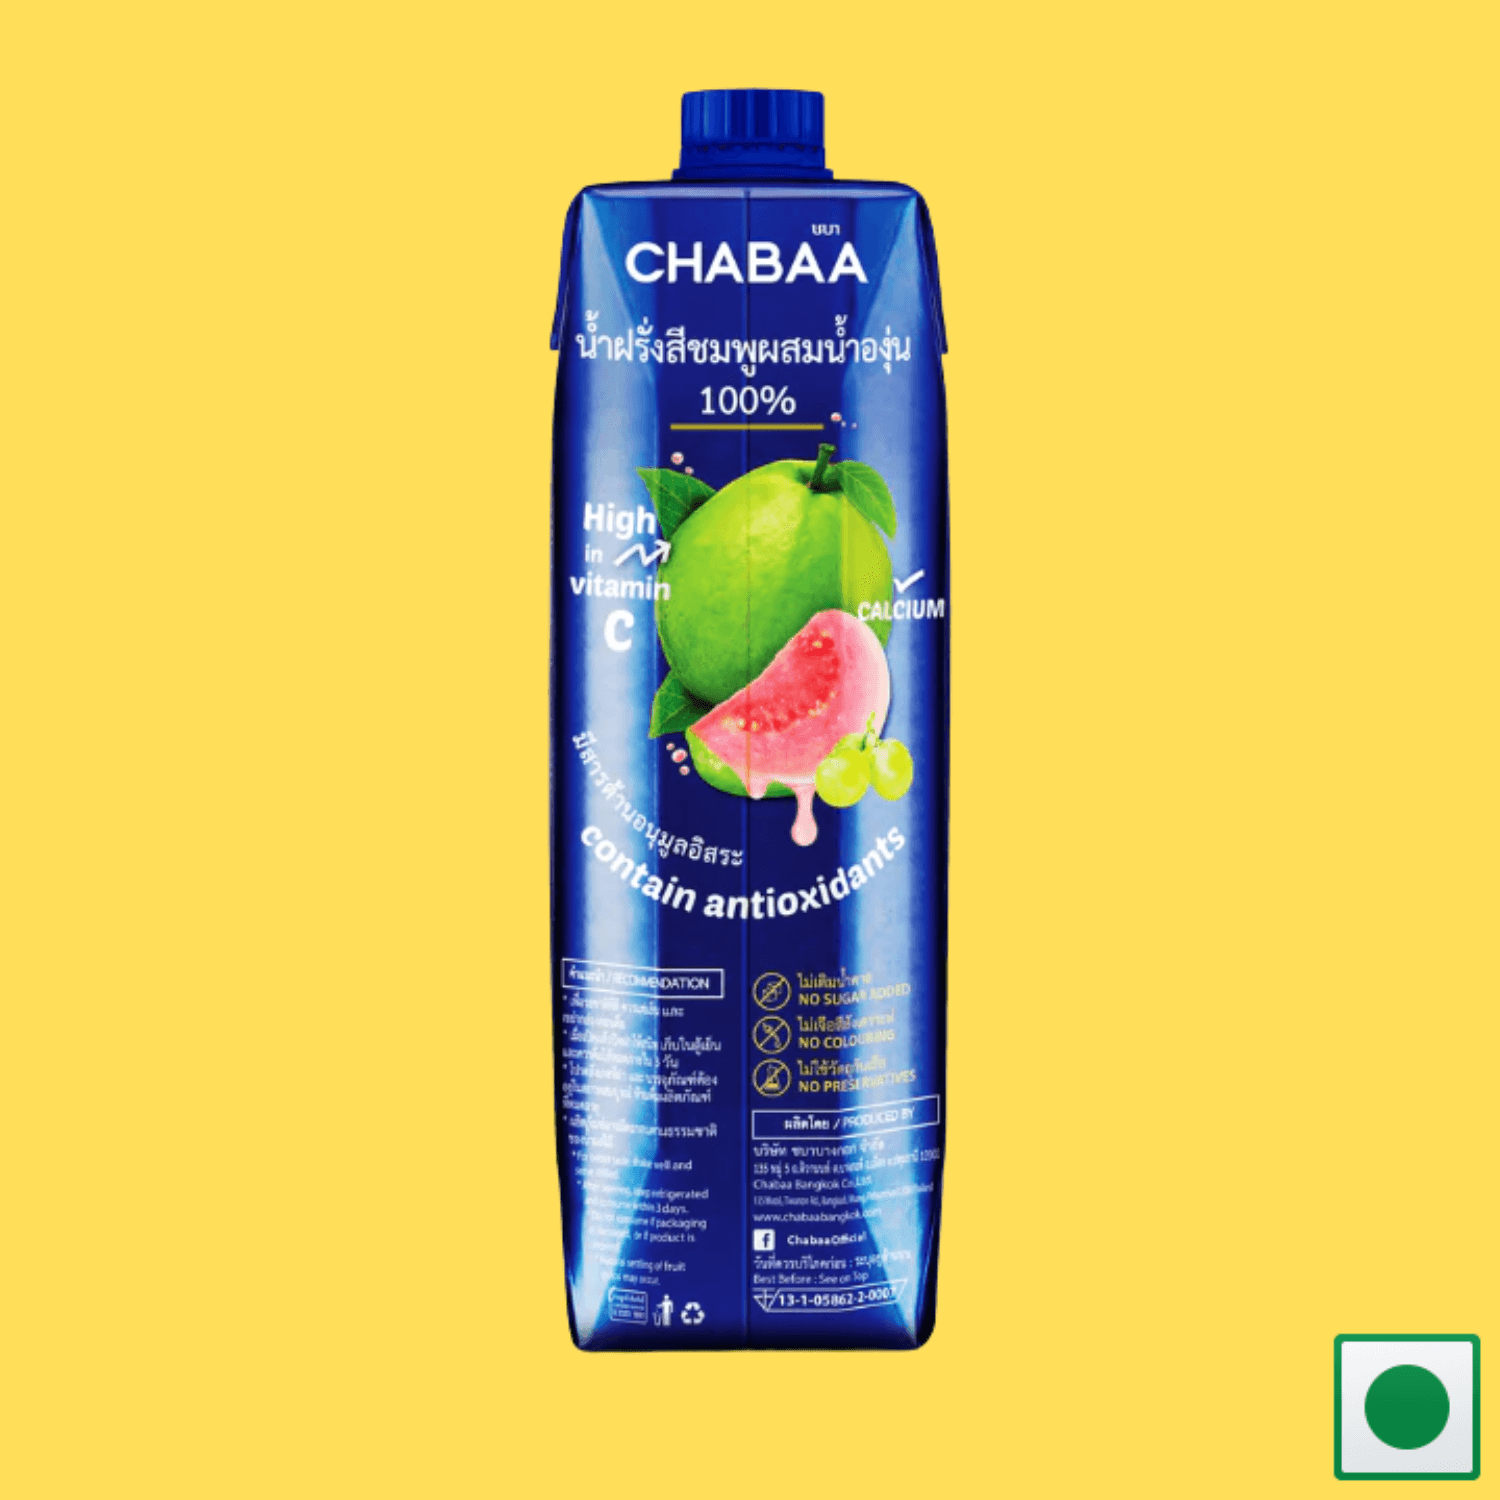 Chabaa Pink Guava & Grape Juice 1L (Imported) - Super 7 Mart